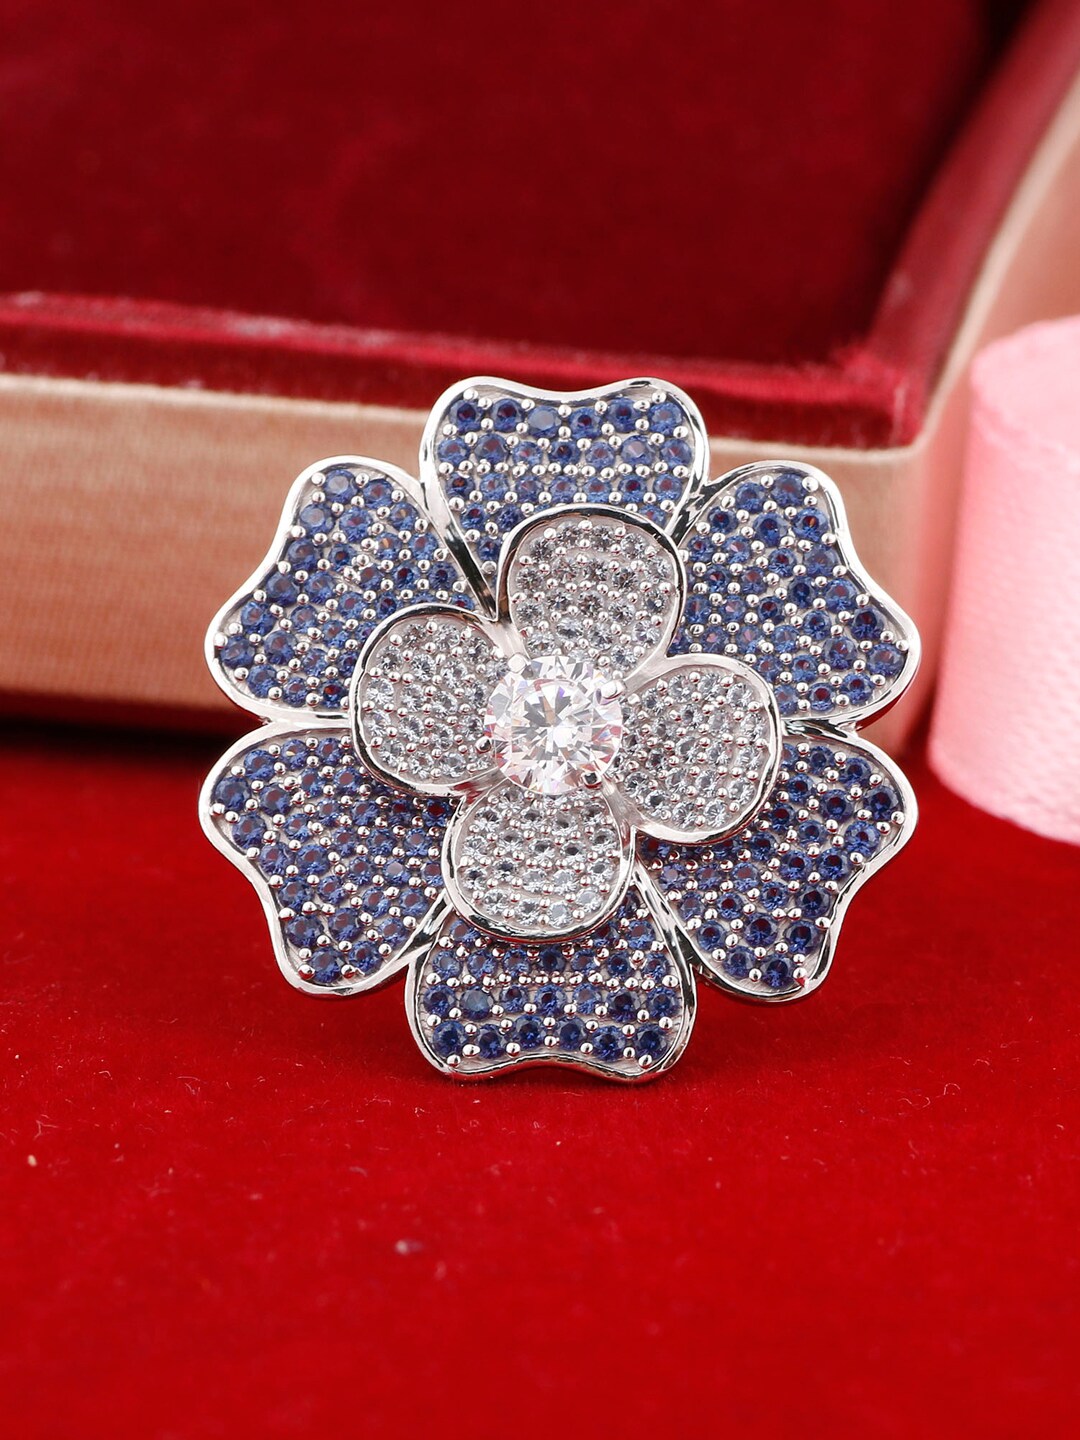 Silgo 925 Sterling Silver Rhodium-Plated White & Blue CZ-Studded Finger Ring Price in India